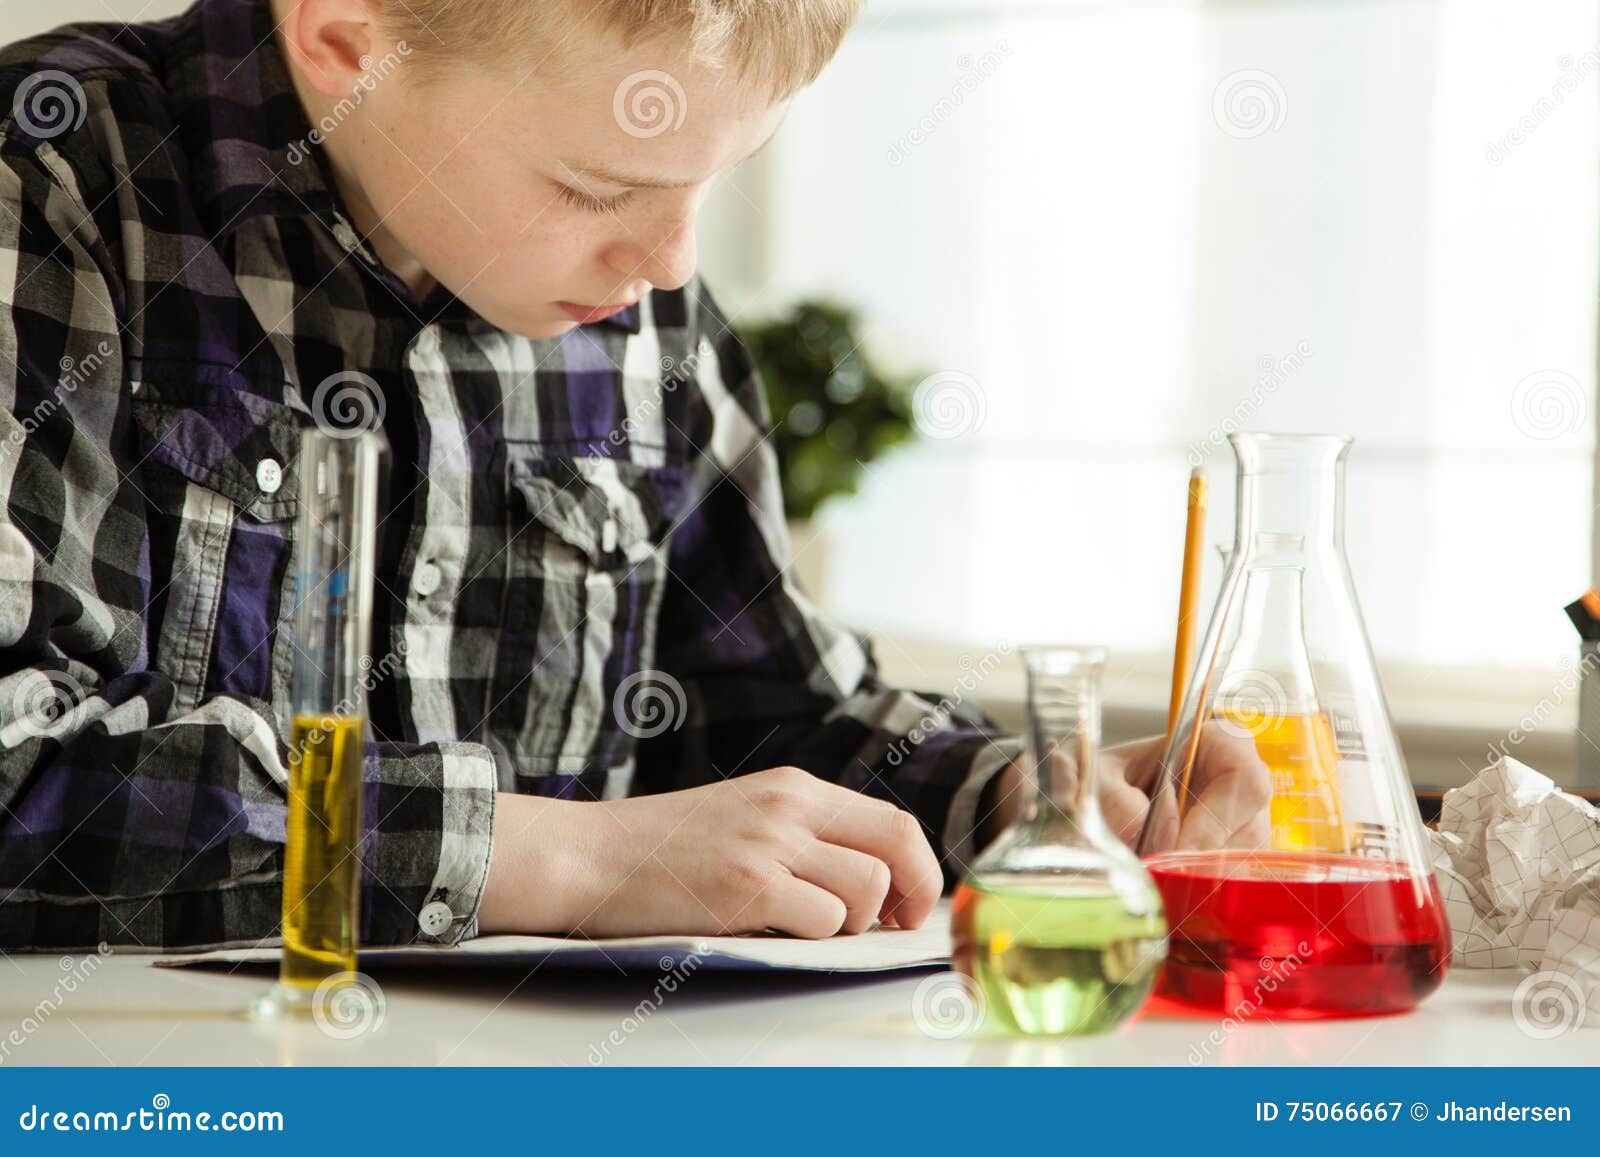 diligent young boy doing his science homework